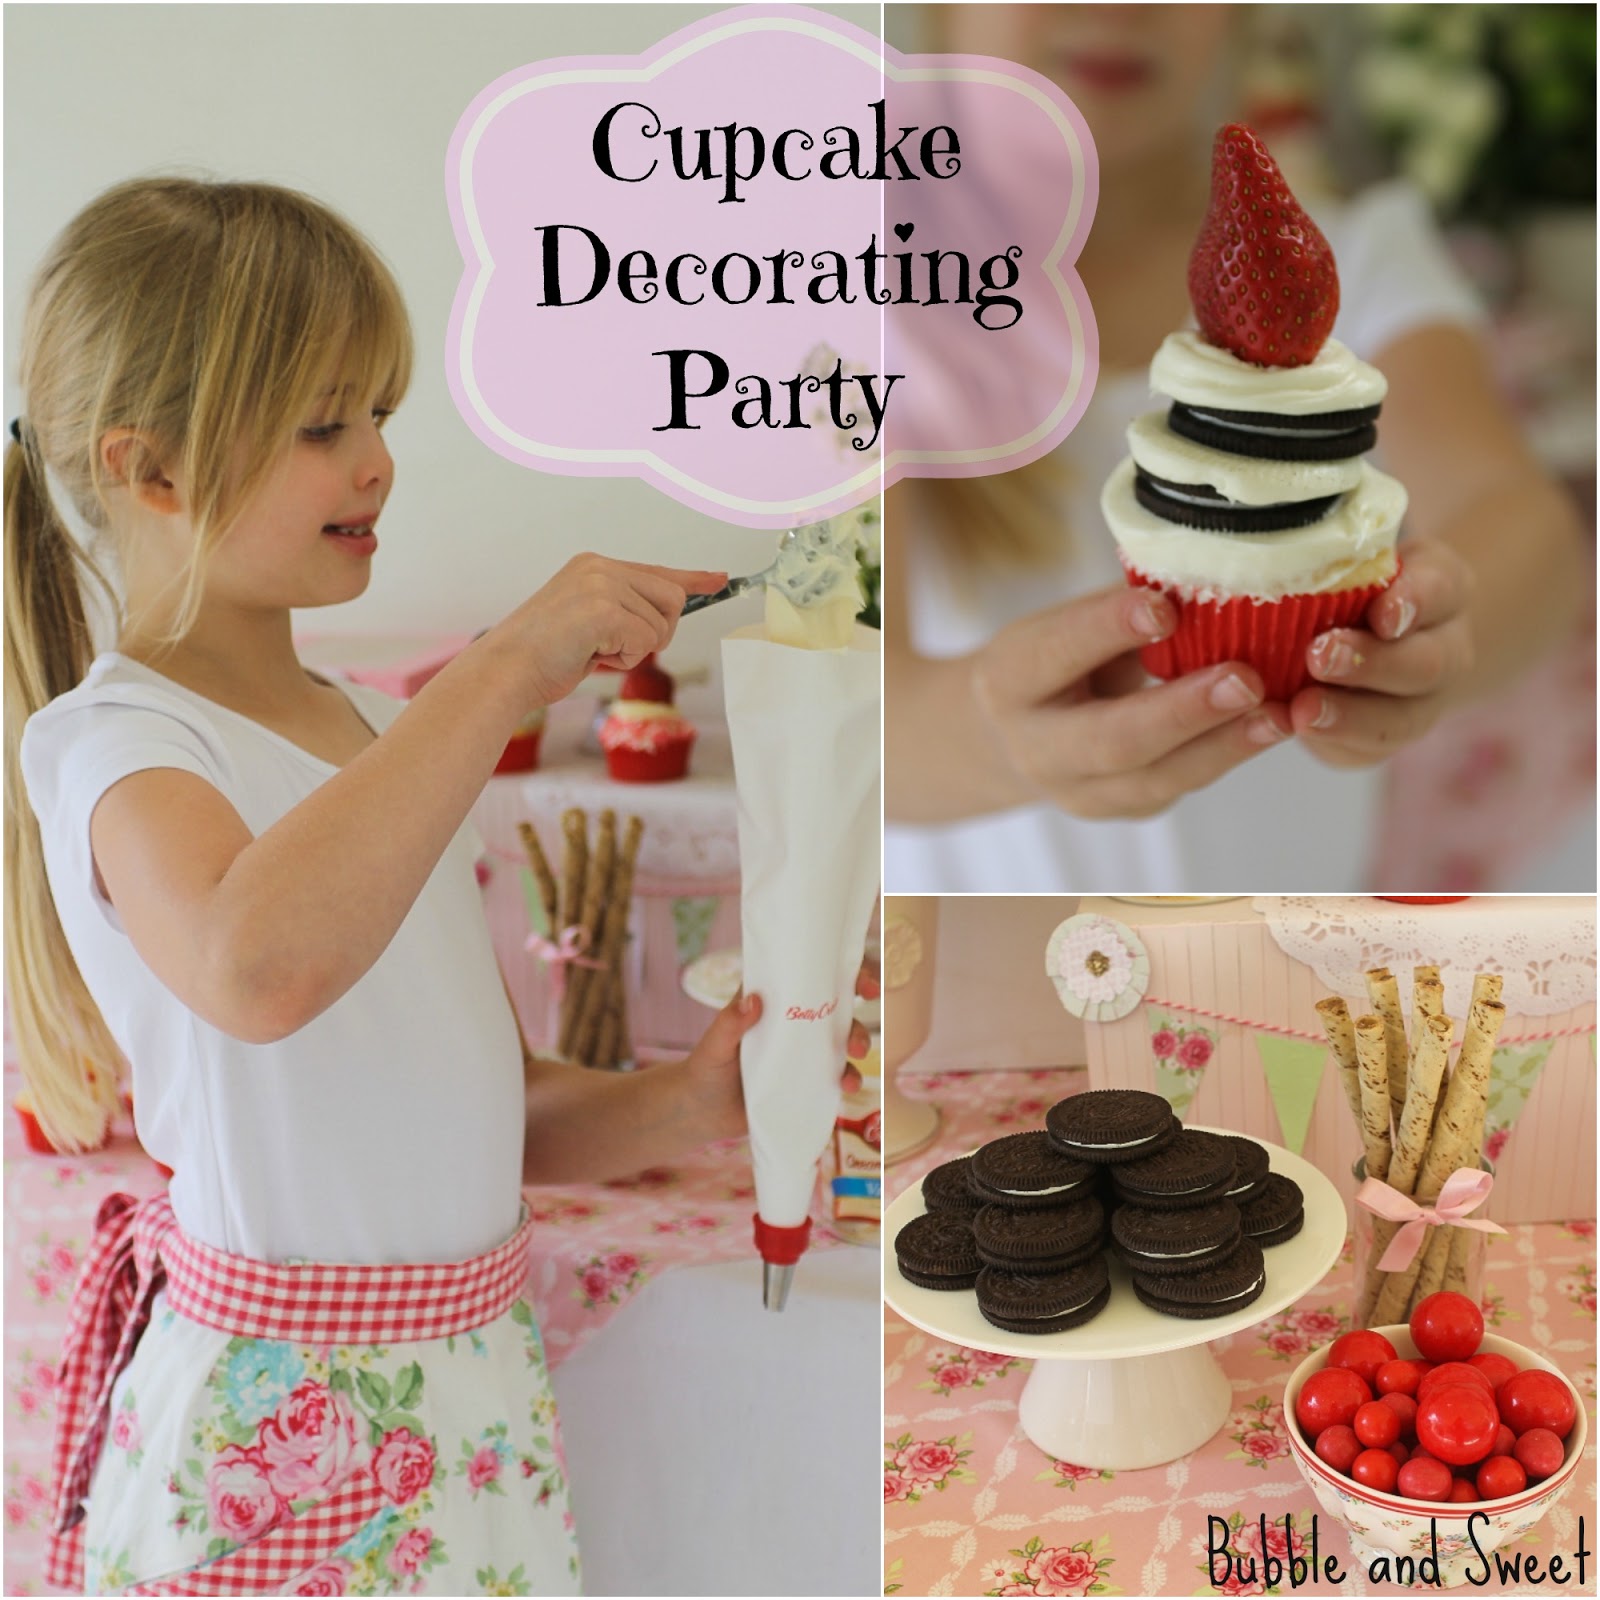 Bubble and Sweet: How to Host a Cupcake Decorating Birthday Party ...